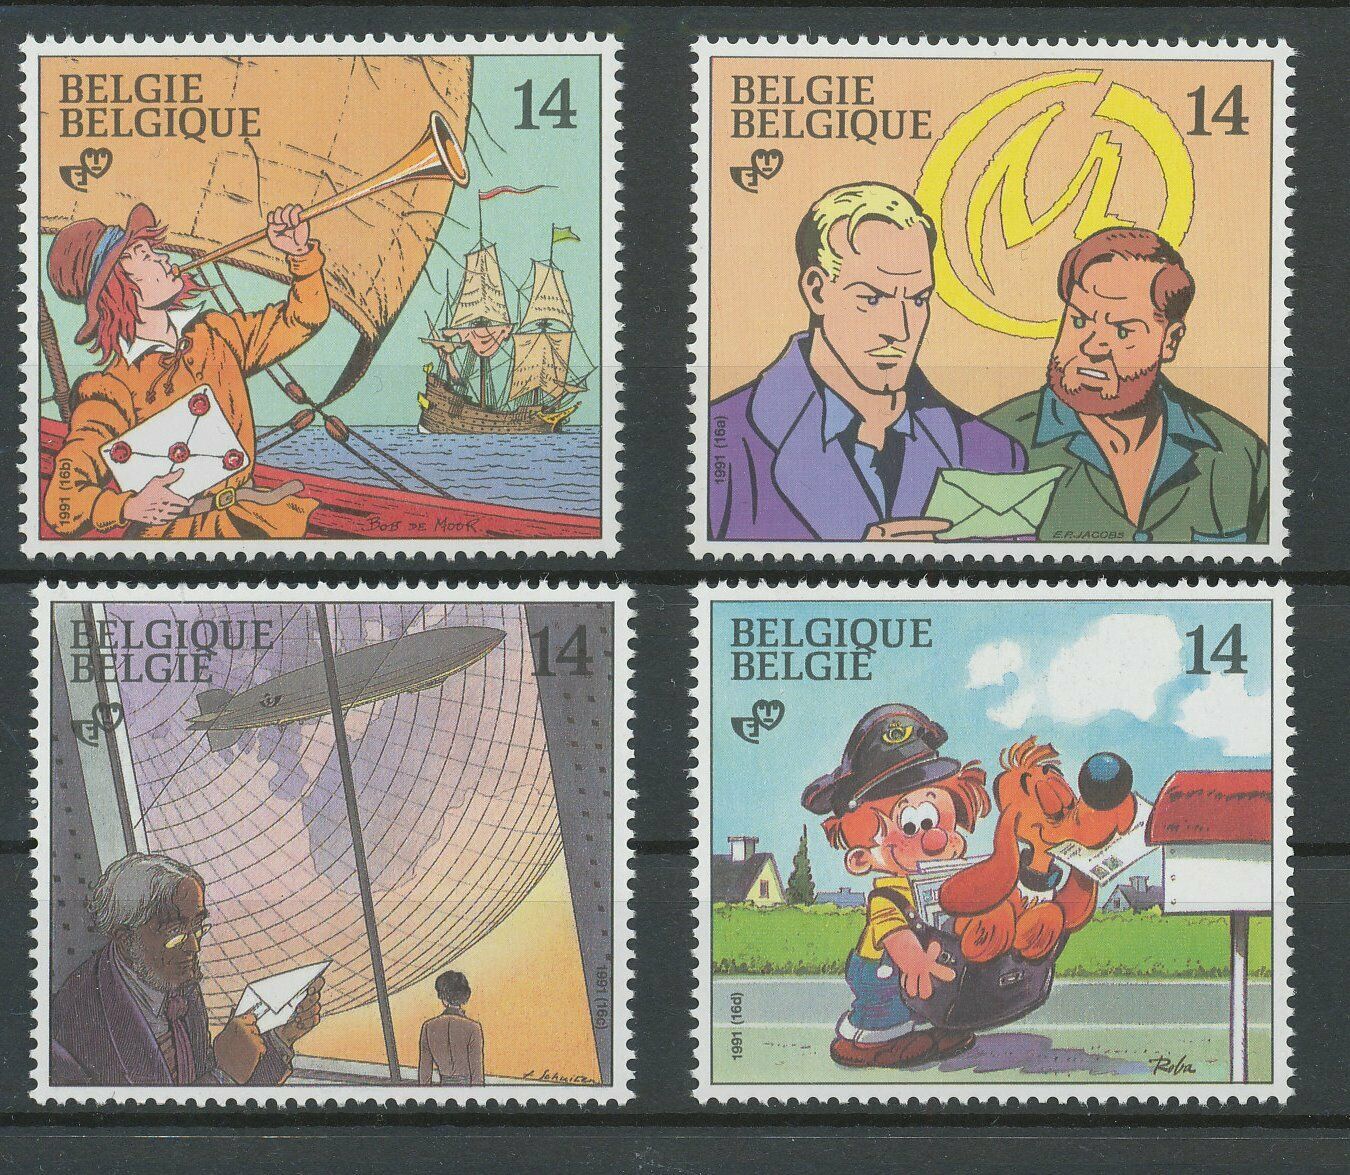 [p316] Belgium 1991 Animations Strips Good Set Very Fine Mnh Stamps